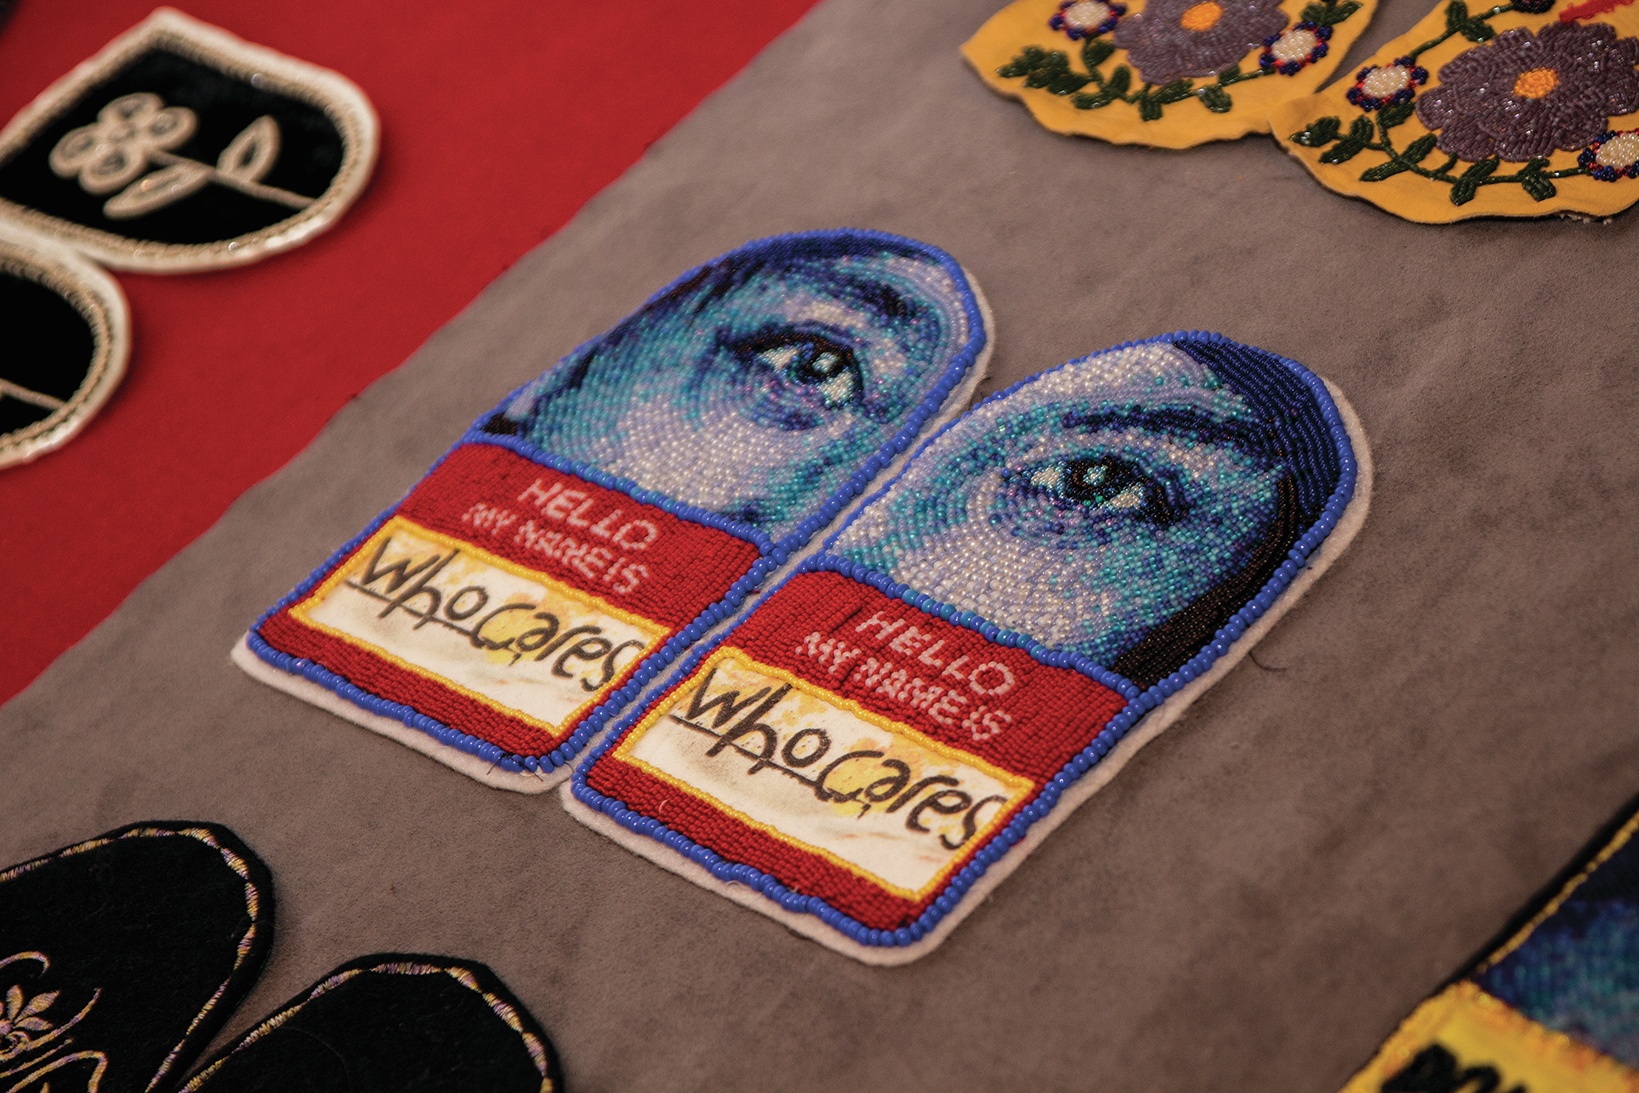 SPARKING A CHANGE - Pictured are vamps (moccasin tops) from the Walking With Our Sisters (WWOS) installation that visited the Red Deer Museum + Art Gallery this past summer to raise awareness of missing and murdered Indigenous women. WWOS developed relationships among women in the community who have come together as Red Feather Women